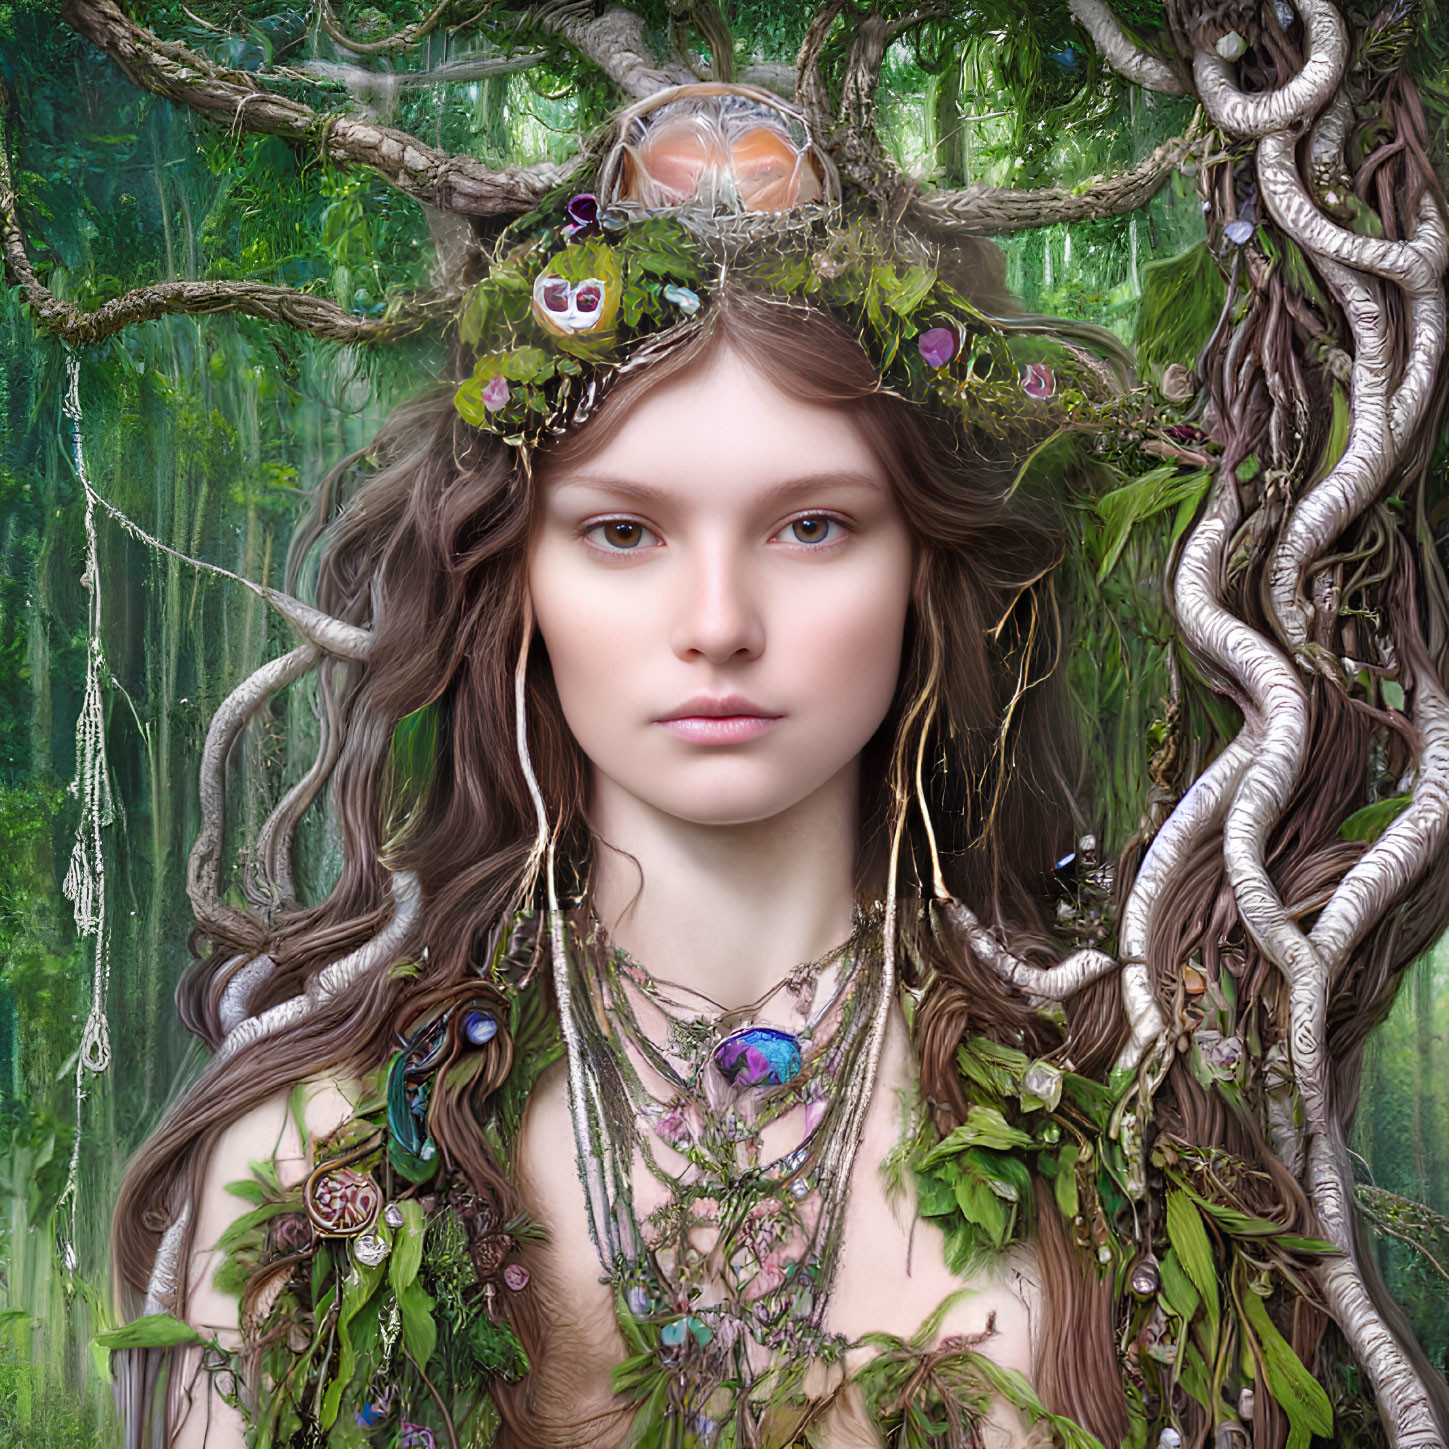 Digital portrait of a woman with mystical forest headdress - enchanting and magical.